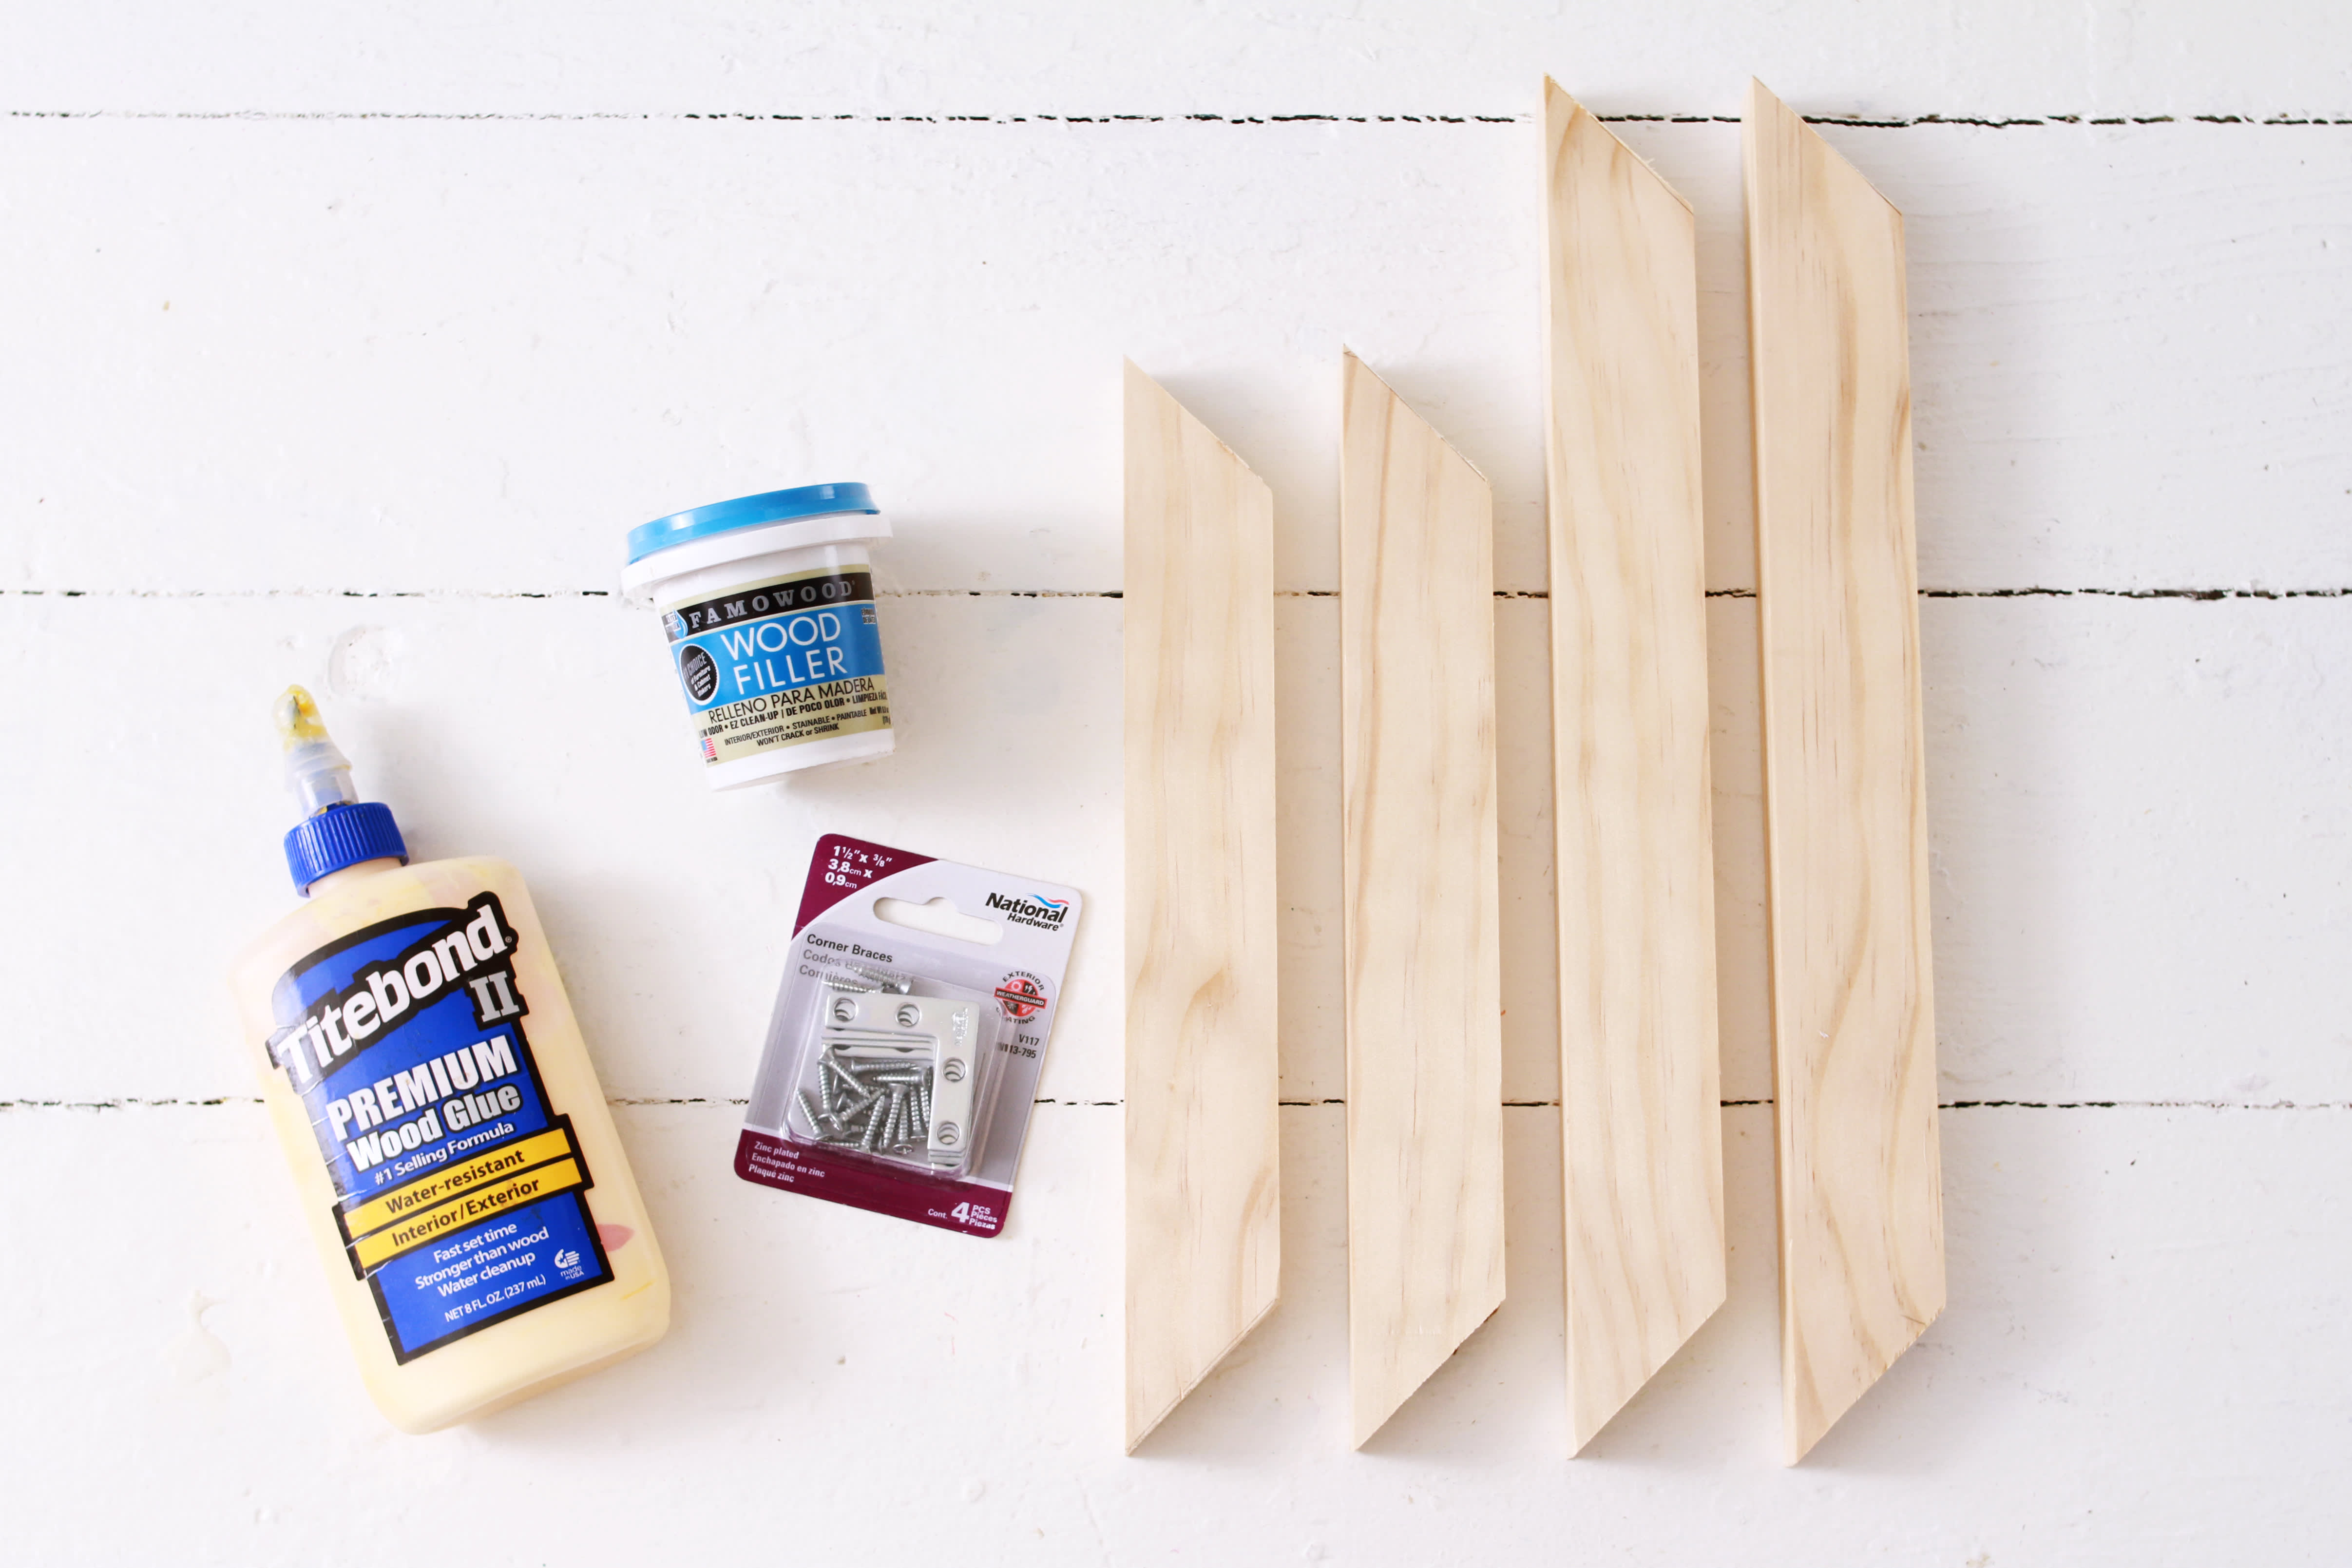 How to Make Cheap Wood Frames the Quick and Easy DIY Way